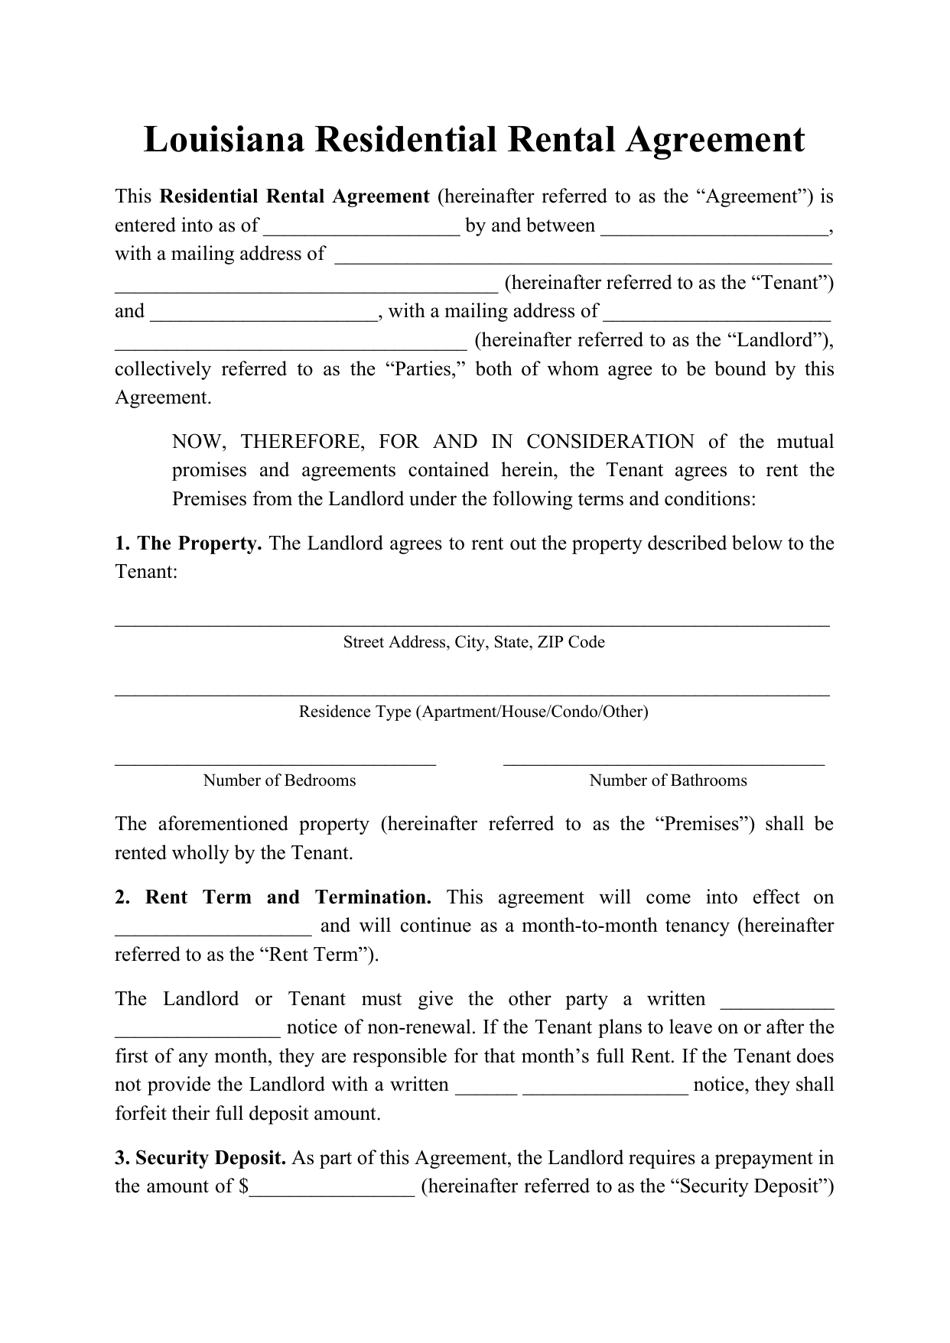 louisiana-residential-rental-agreement-template-fill-out-sign-online